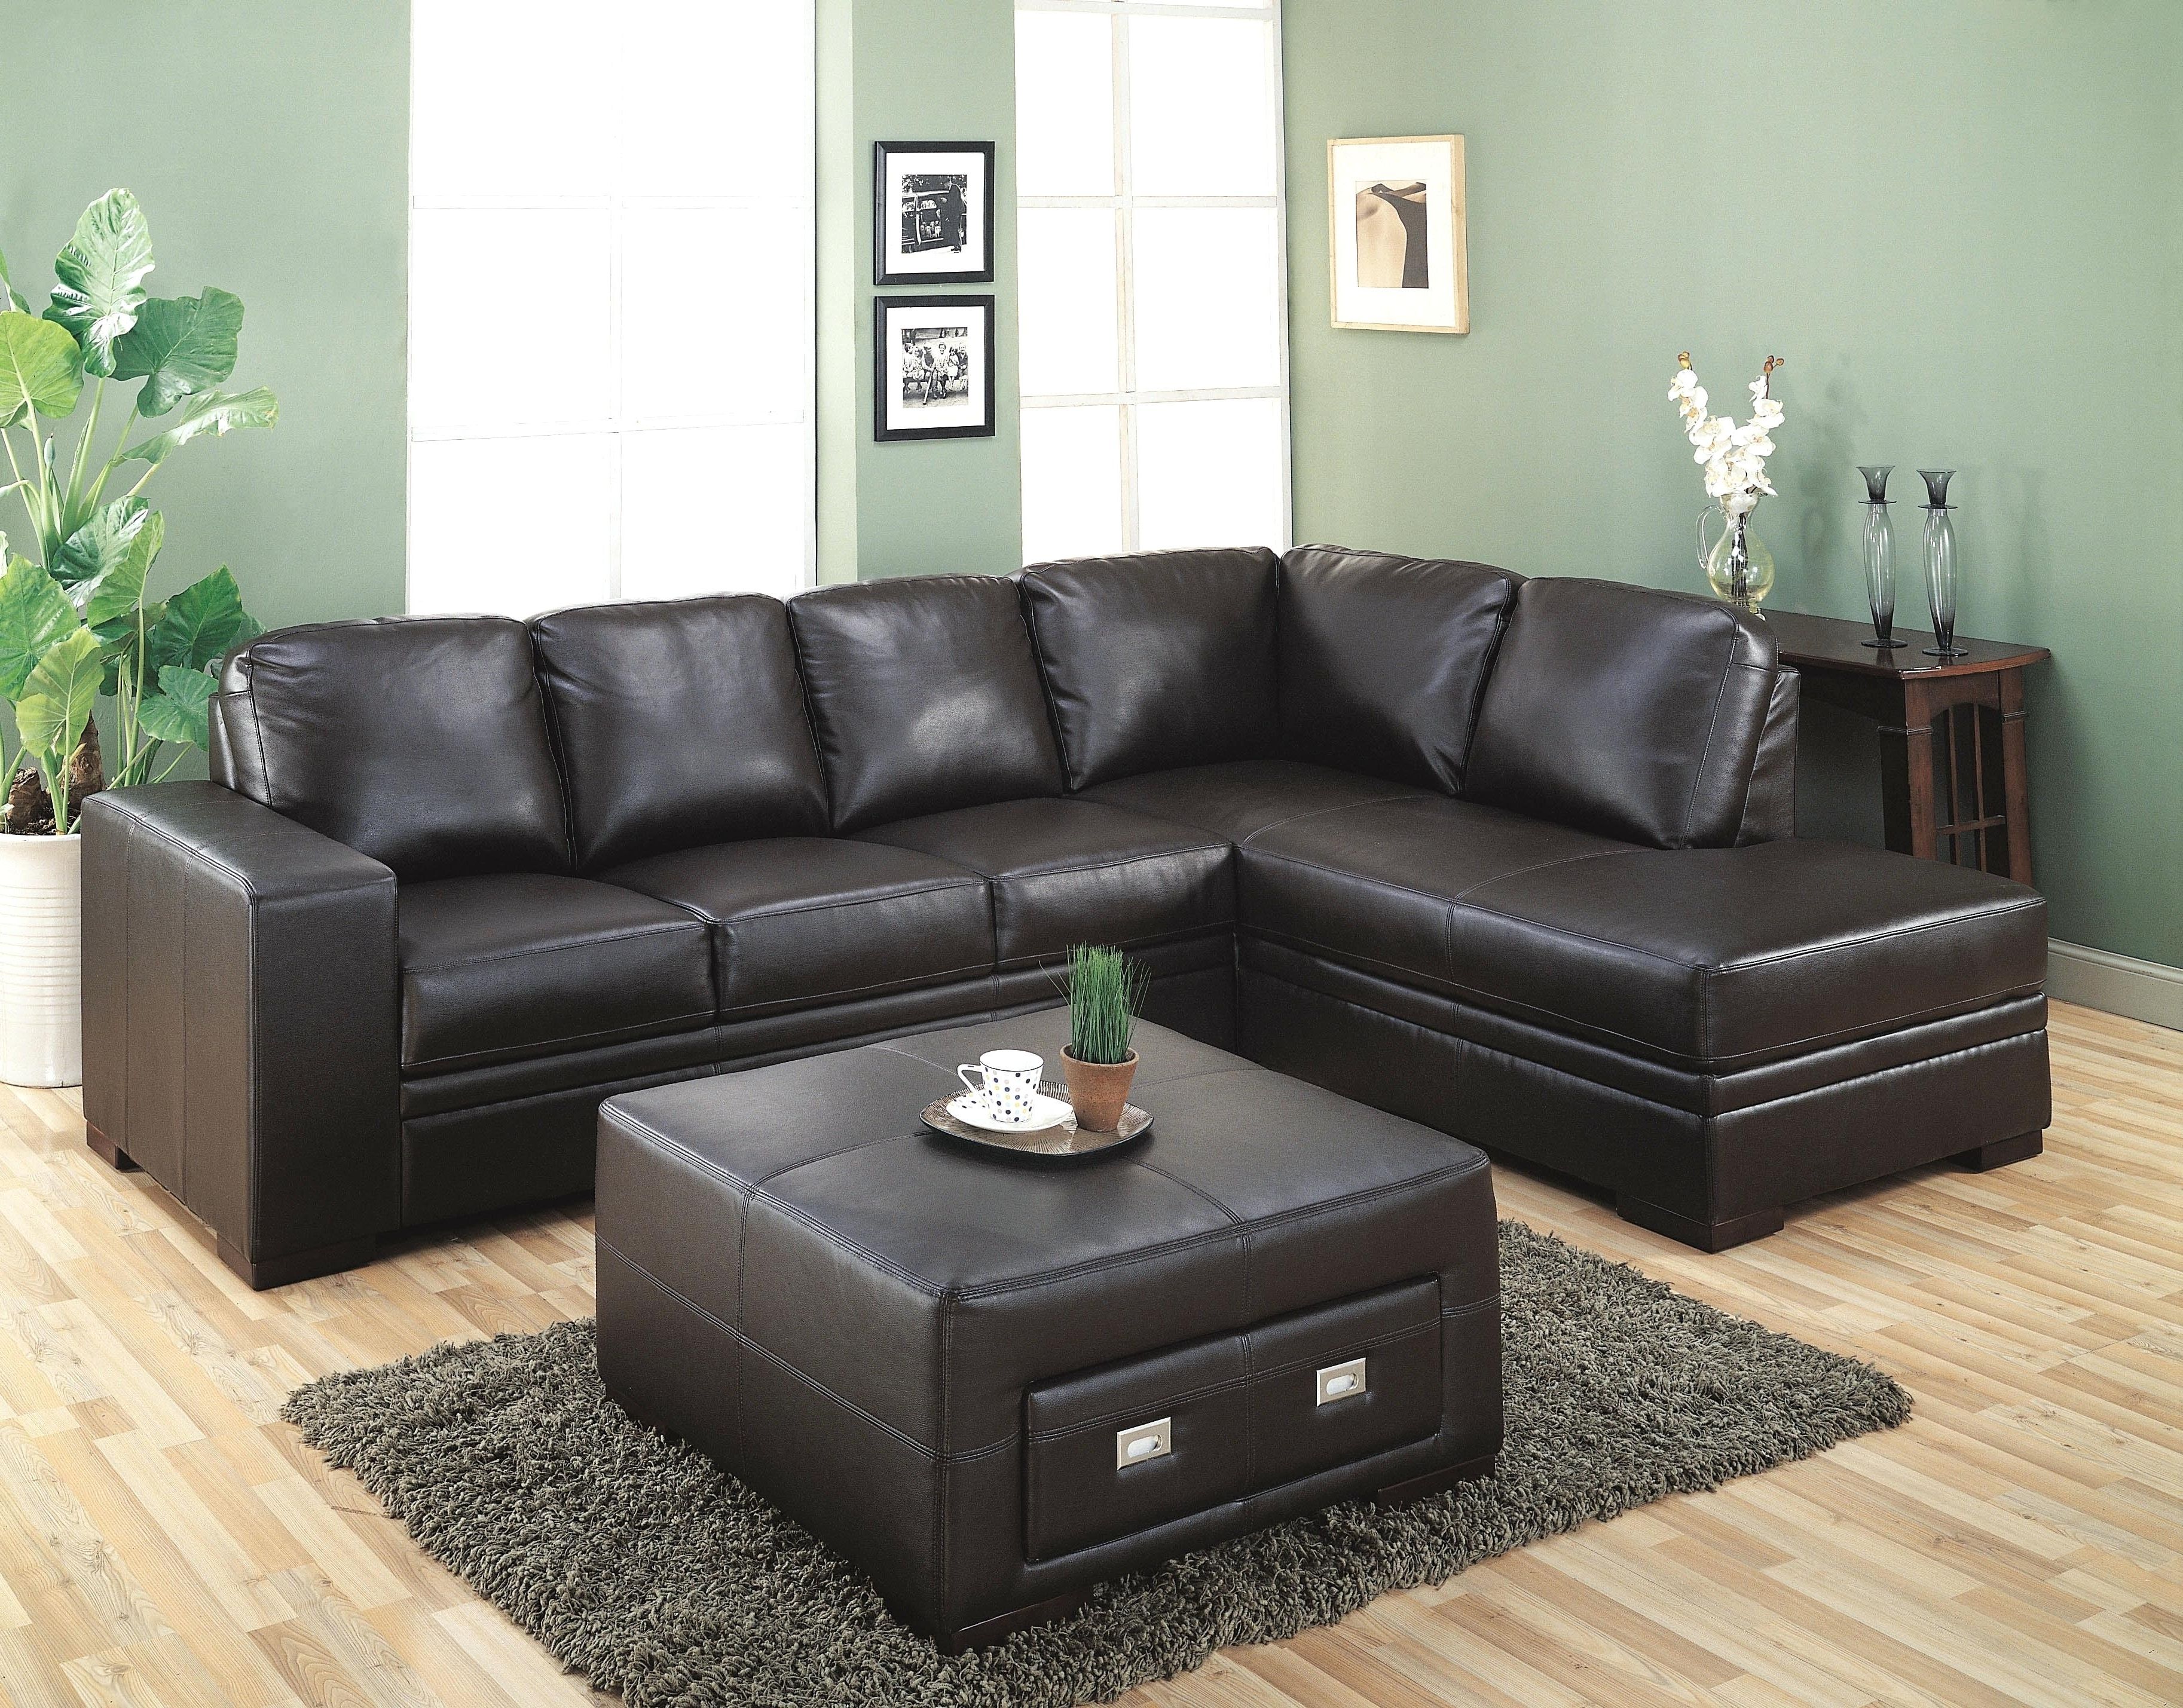 Berkline Sectional Sofas For Most Current Berkline Sectional Sofa Reviews Leather Sofas – Poikilothermia (View 10 of 15)